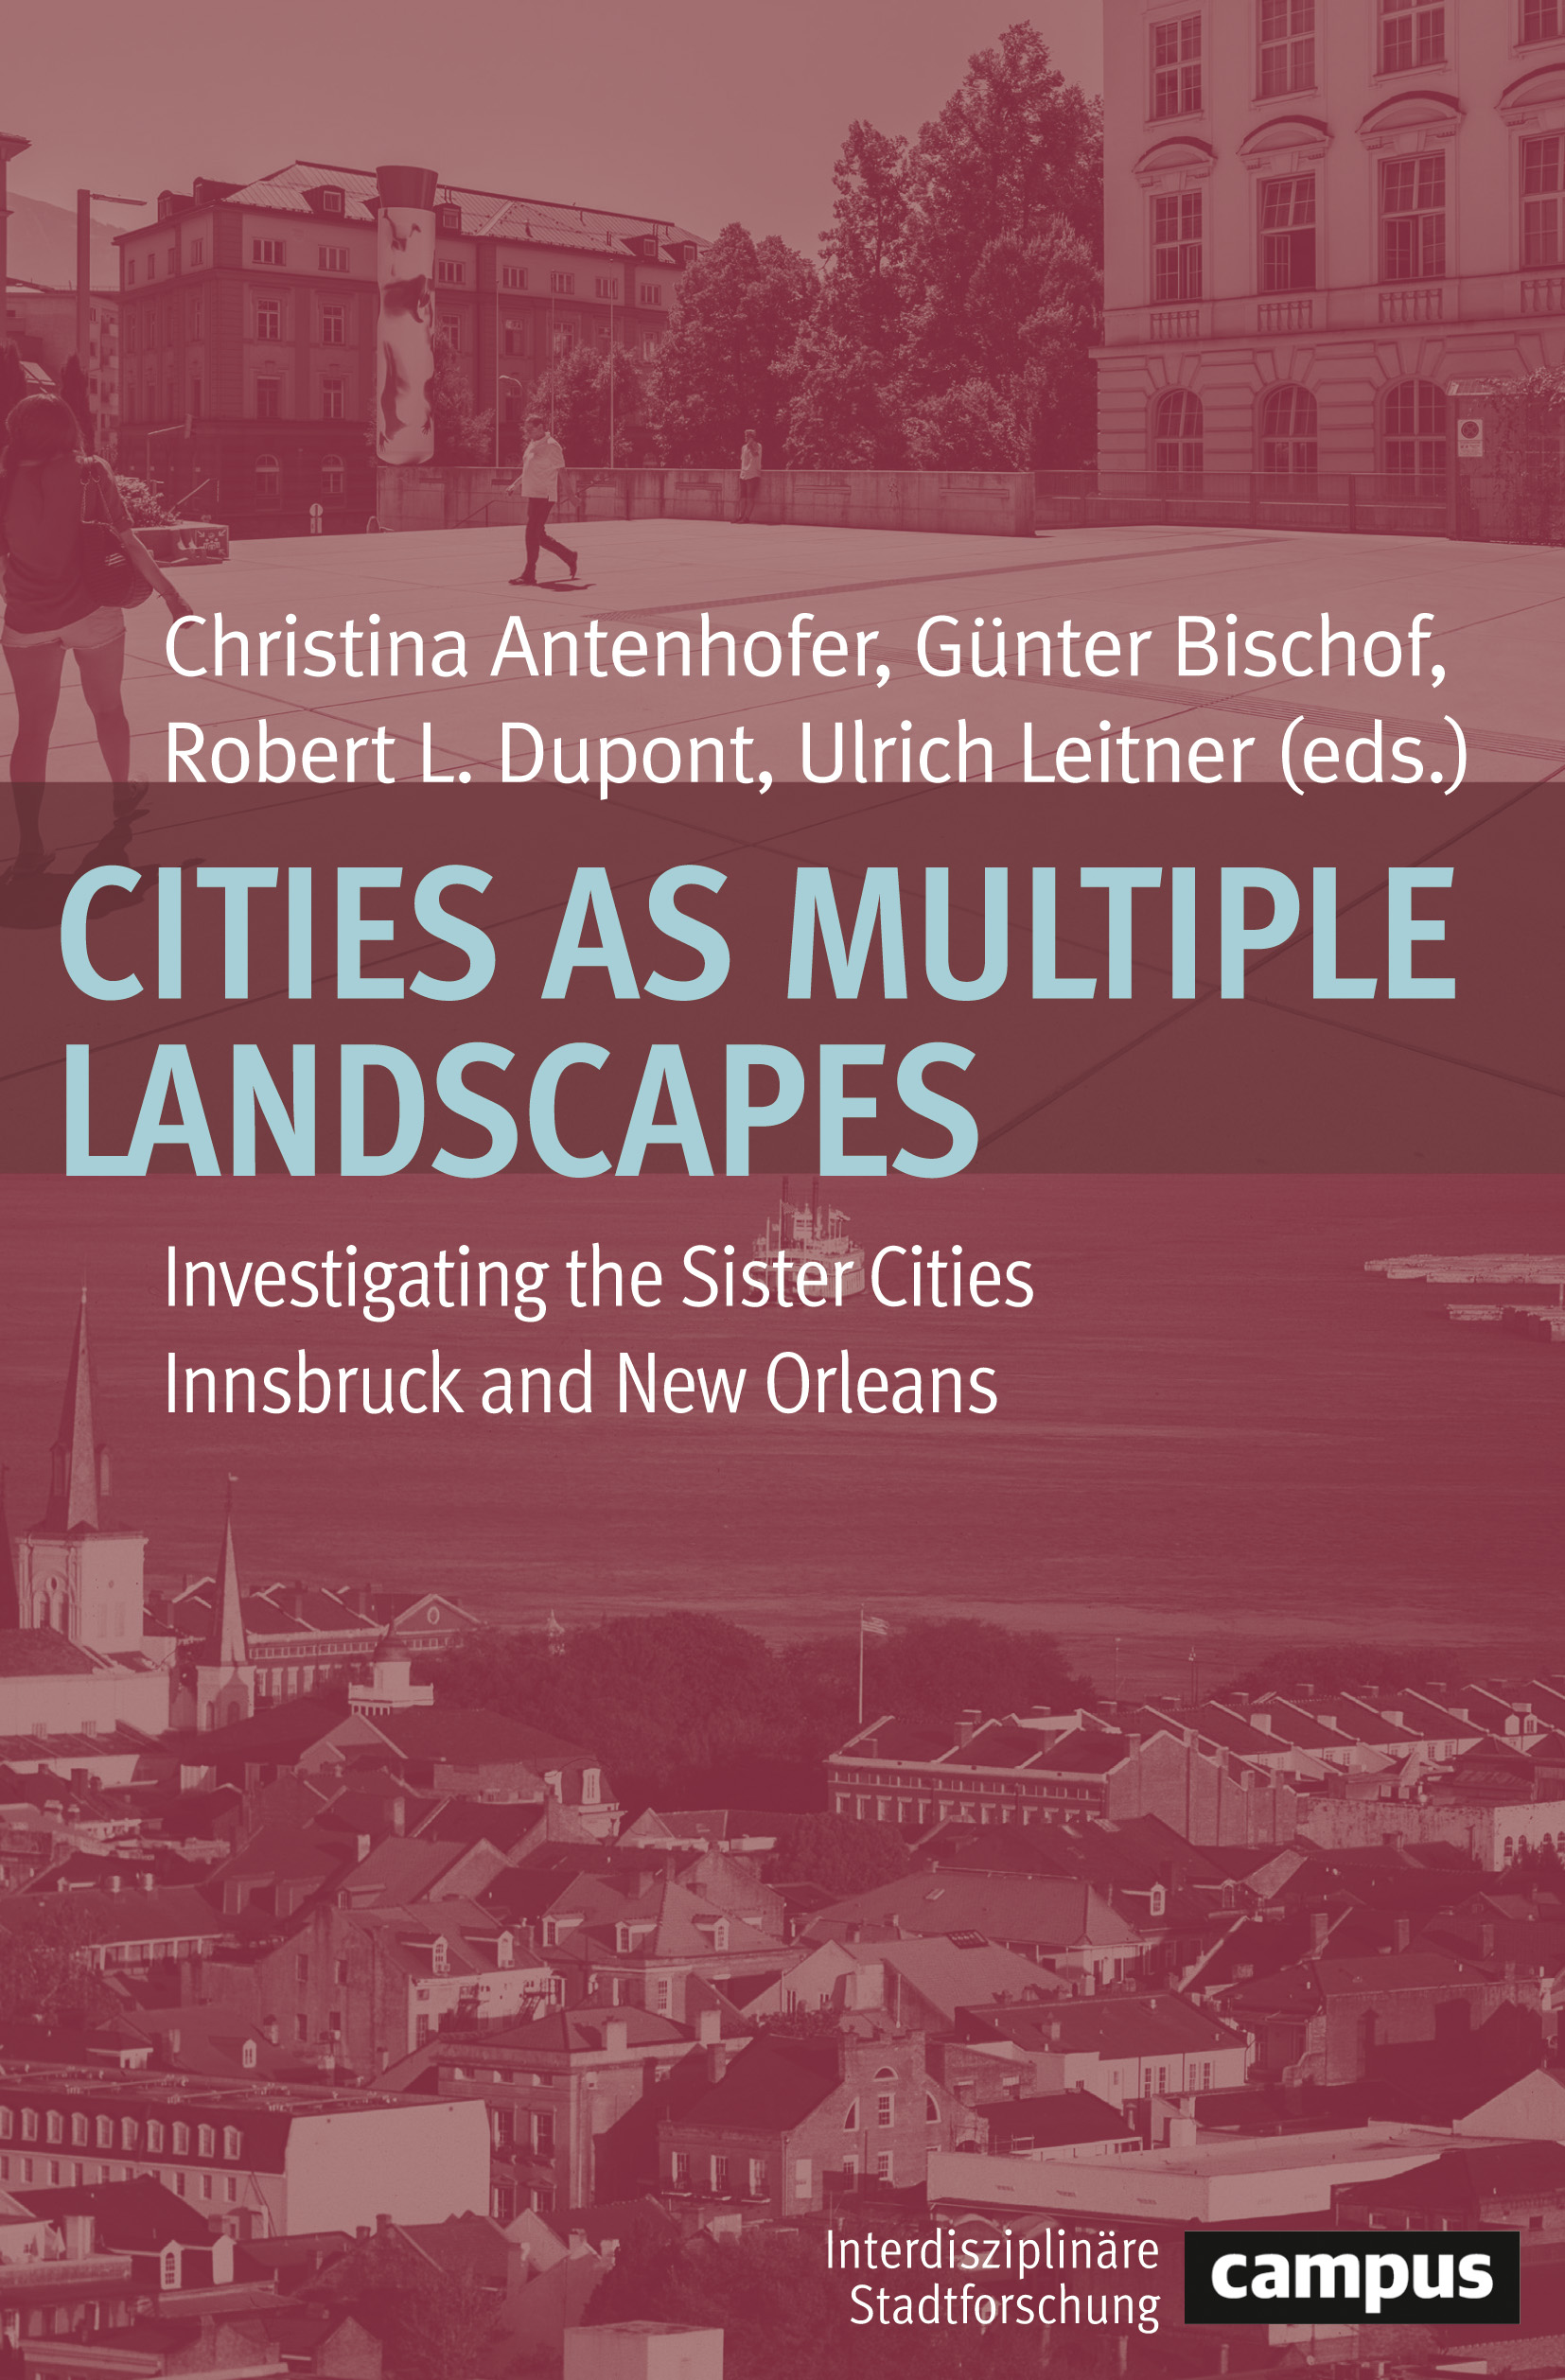 Cities as Multiple Landscapes